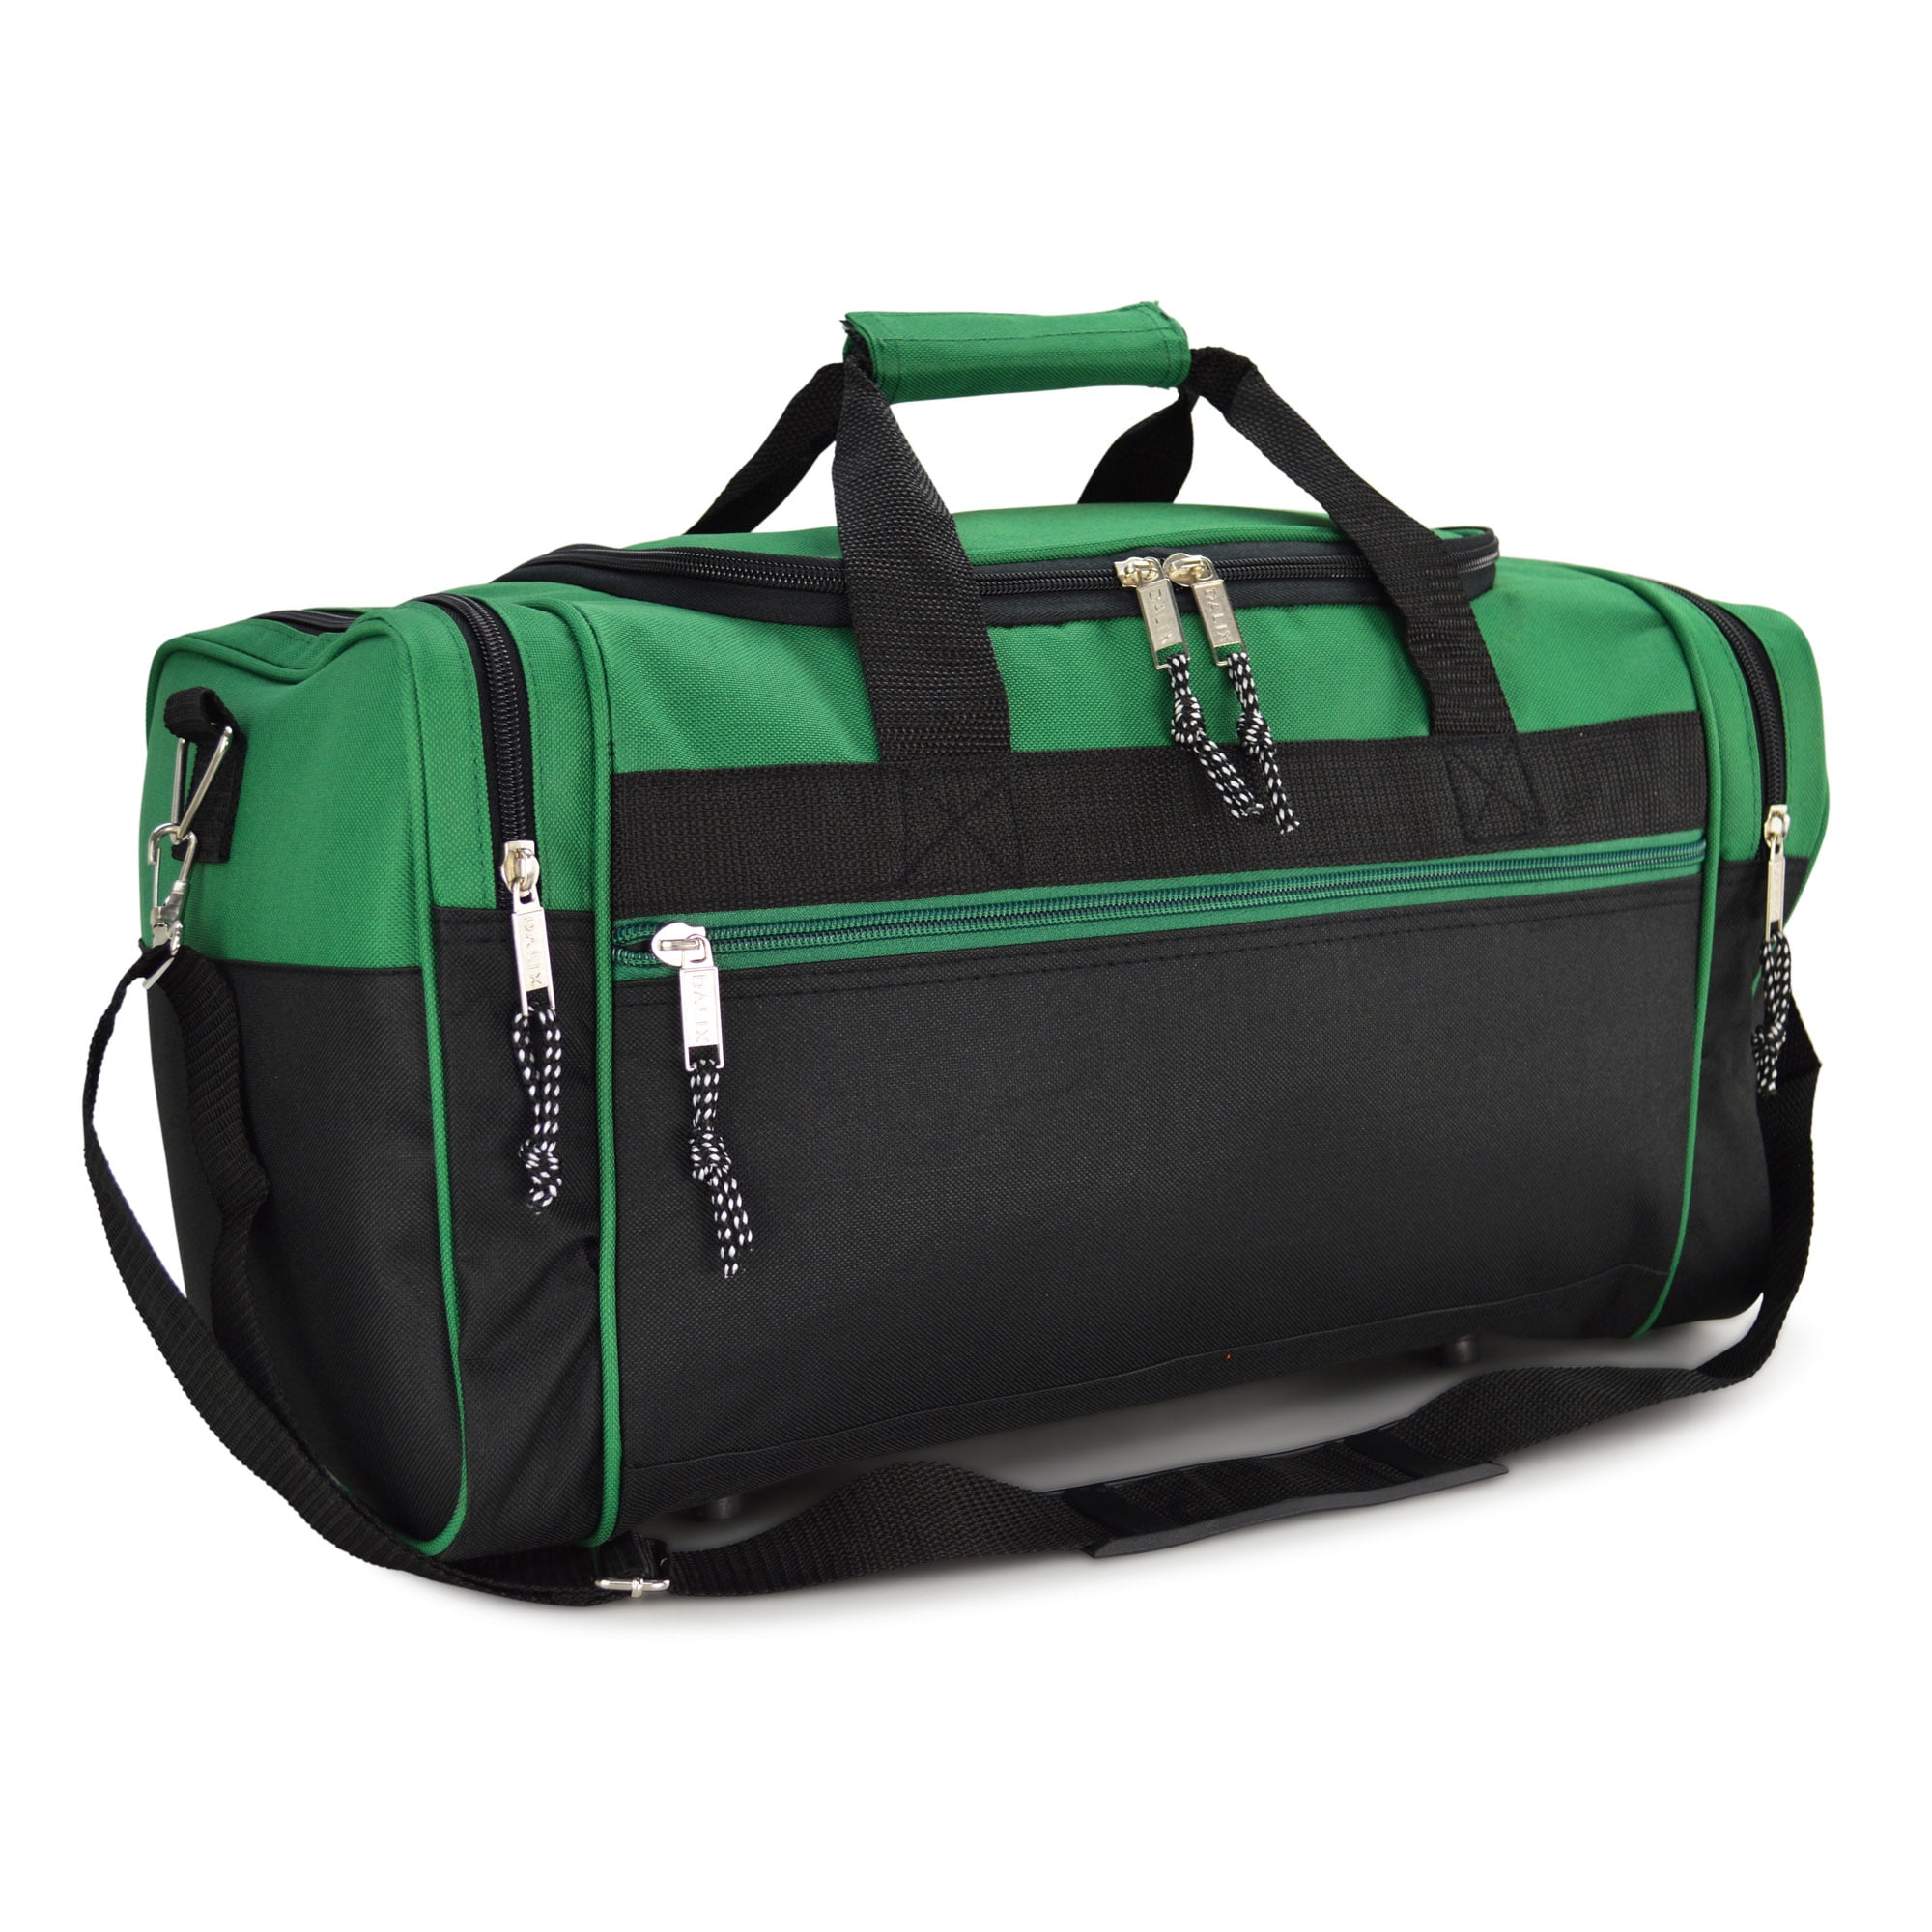 21 Blank Sports Duffle Bag Gym Bag Travel Duffel with Adjustable Strap in Green - 0